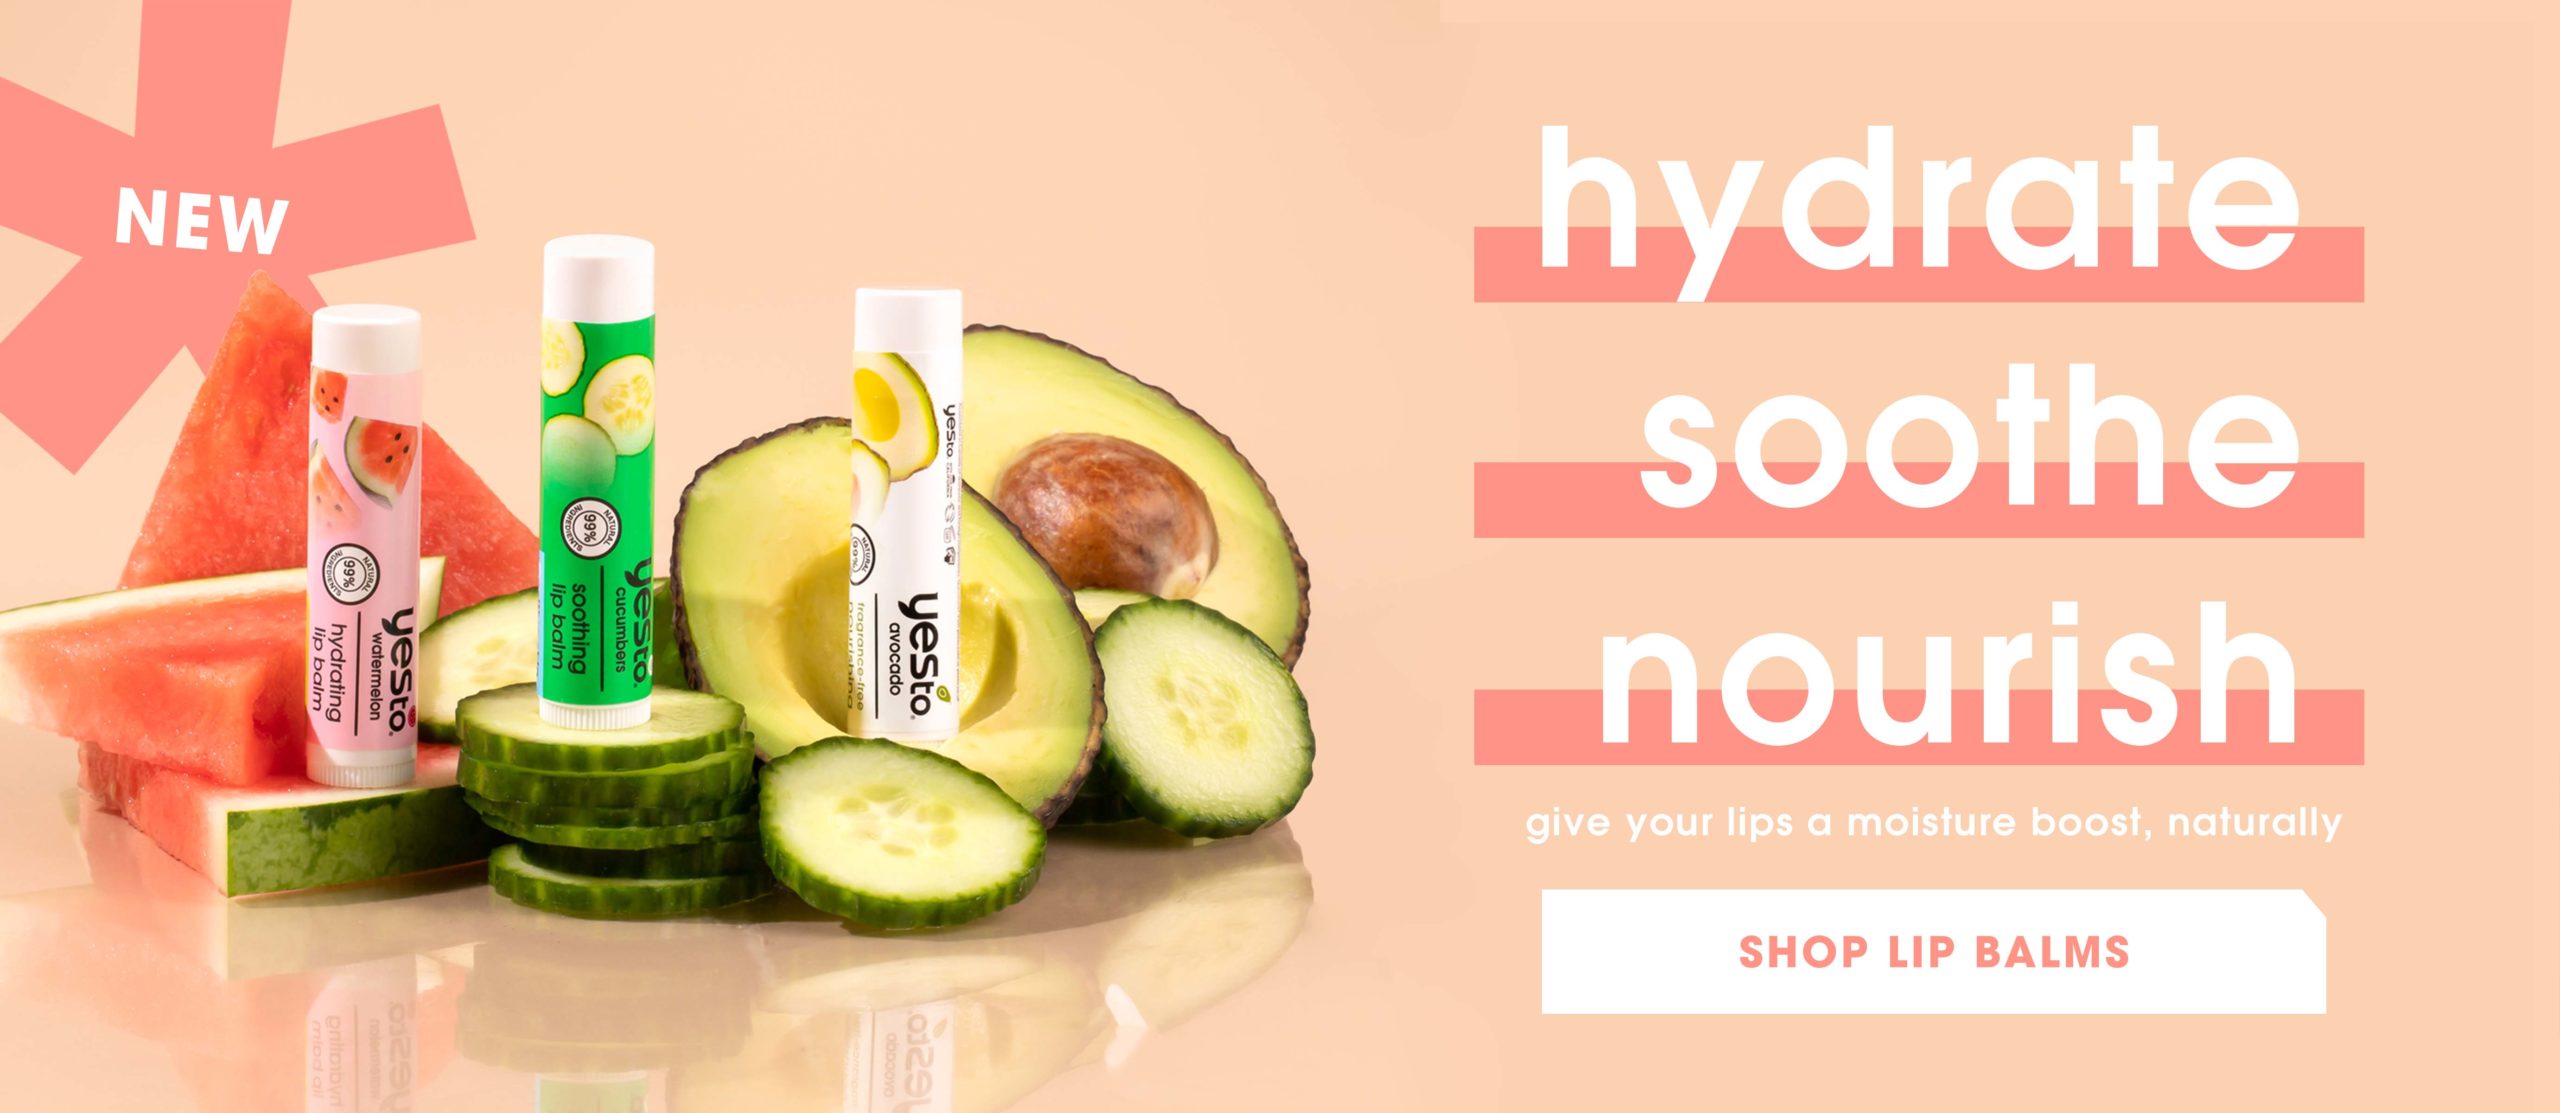 New lip balm collection with Watermelon Avocado and Cucumber